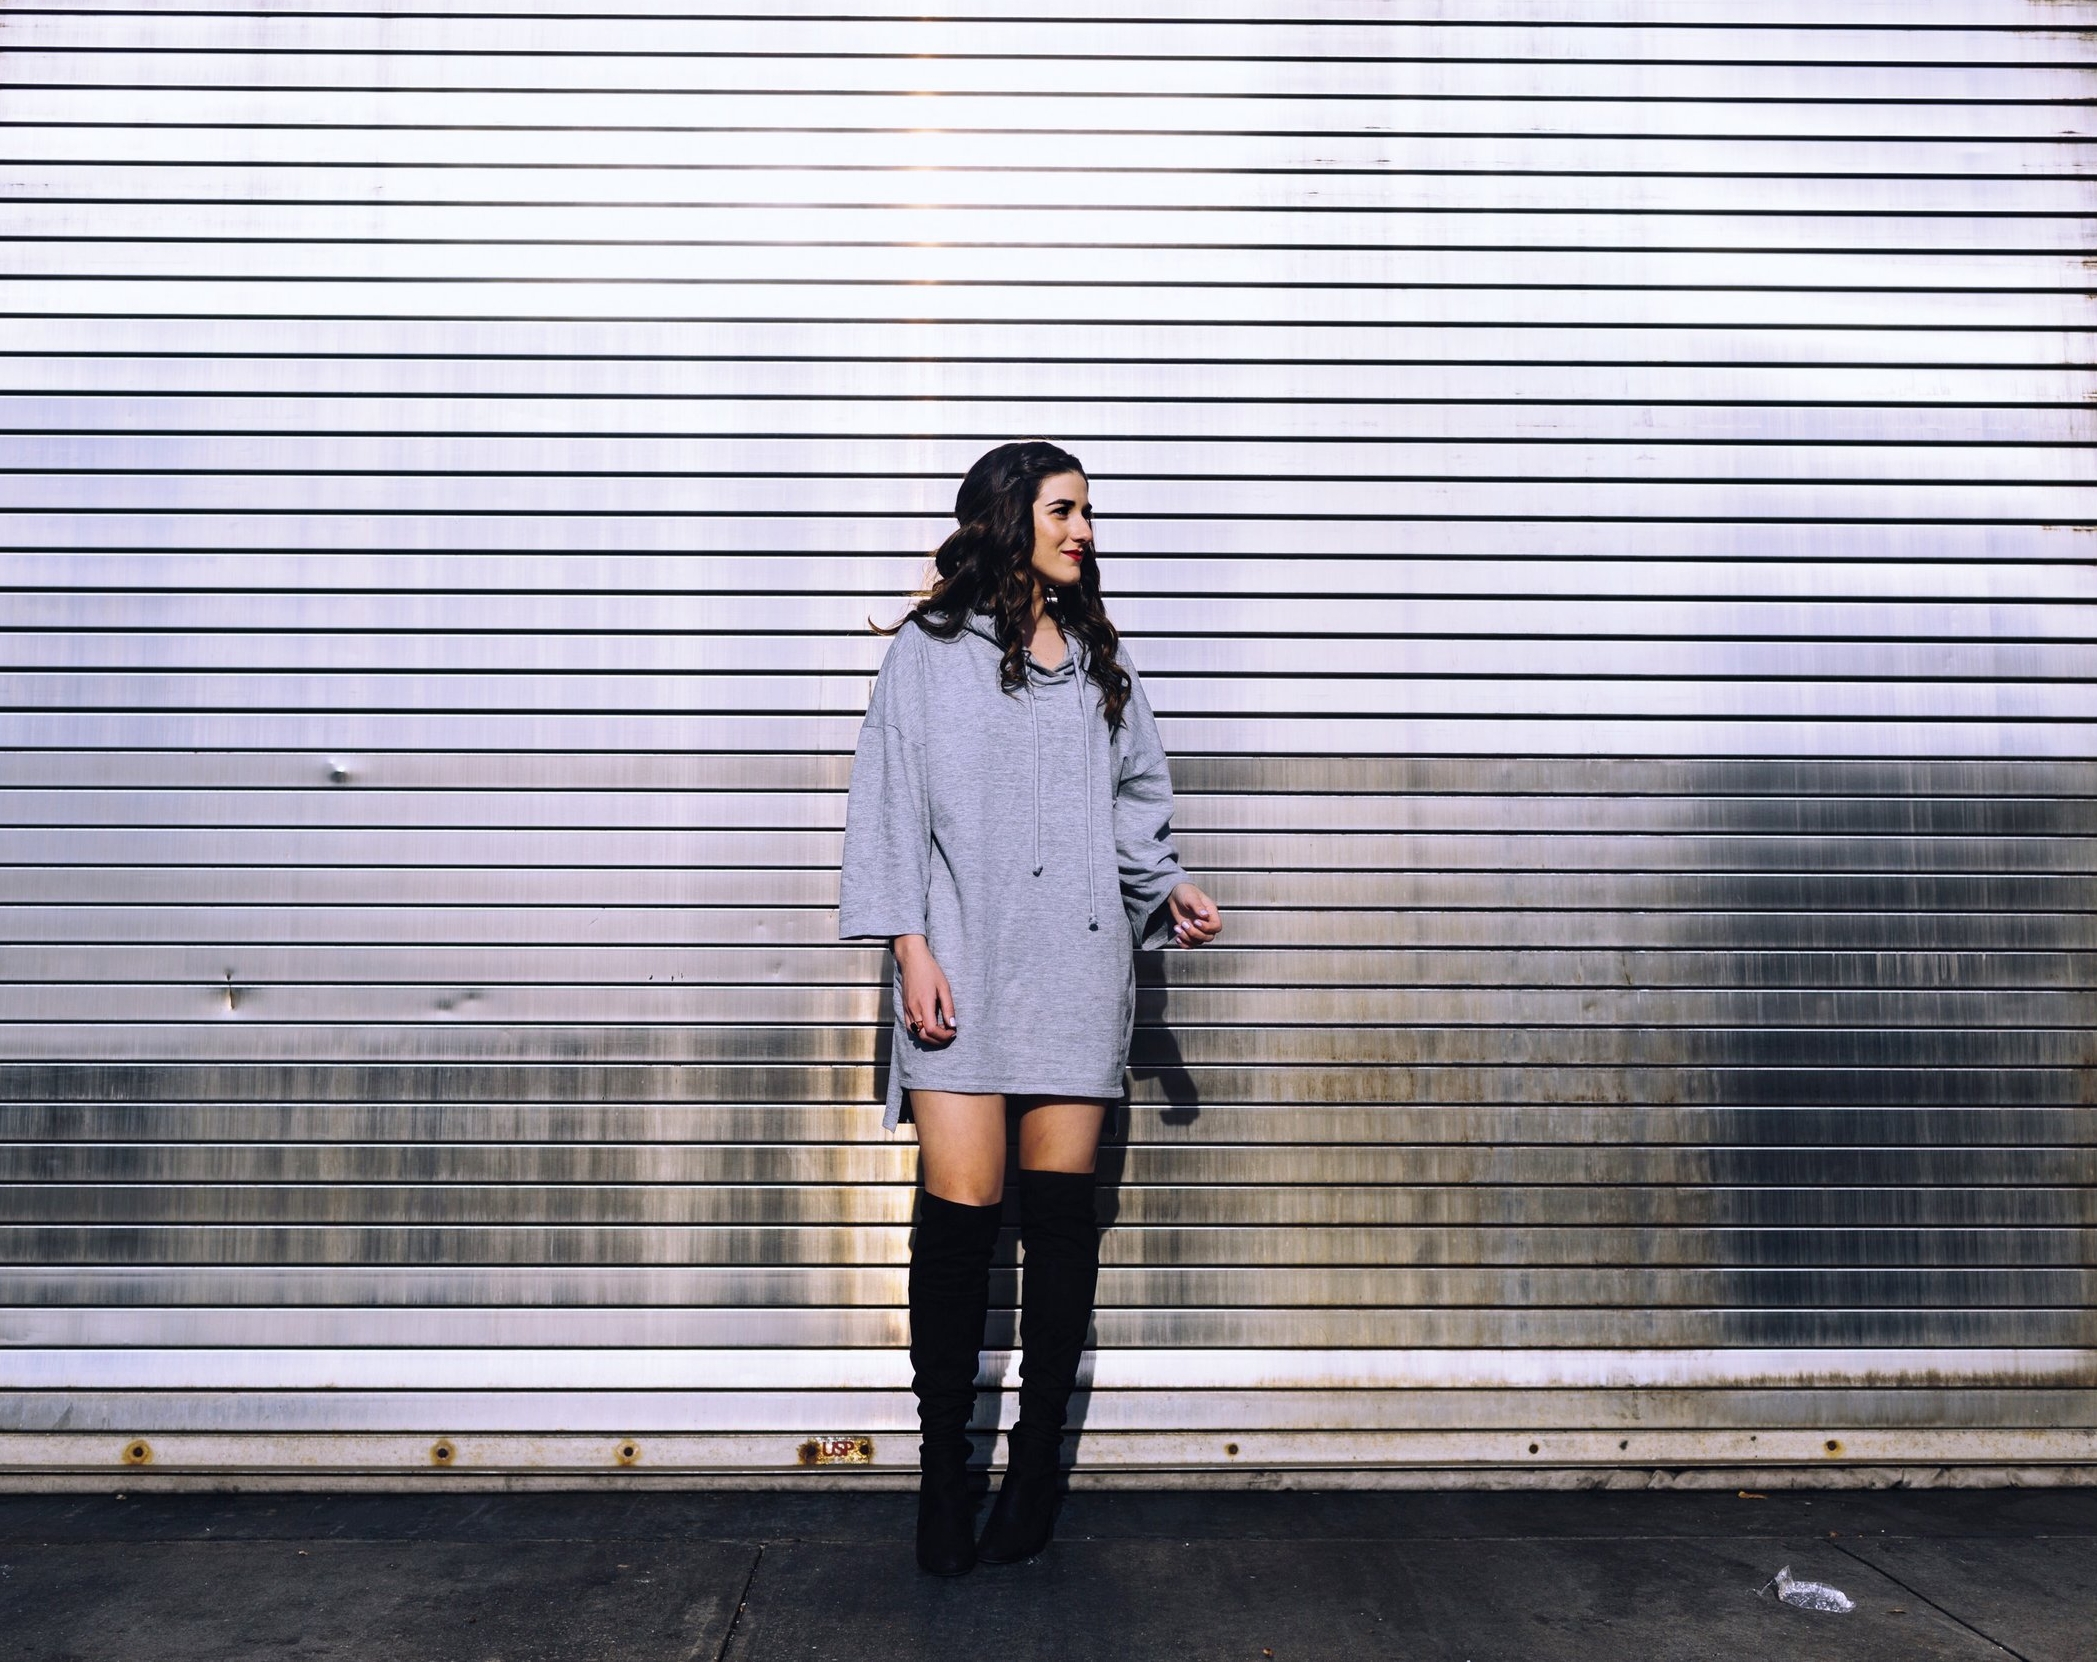 Grey Sweatshirt Dress OTK Boots The Pros and Cons of Blogging Esther Santer Fashion Blog Louboutins & Love NYC Street Style Blogger Outfit OOTD Trendy Edgy Feminine Hair Girl Women Minimal Simple Casual Look Zara Over The Knee Boots Shoes Buy Shopping.JPG